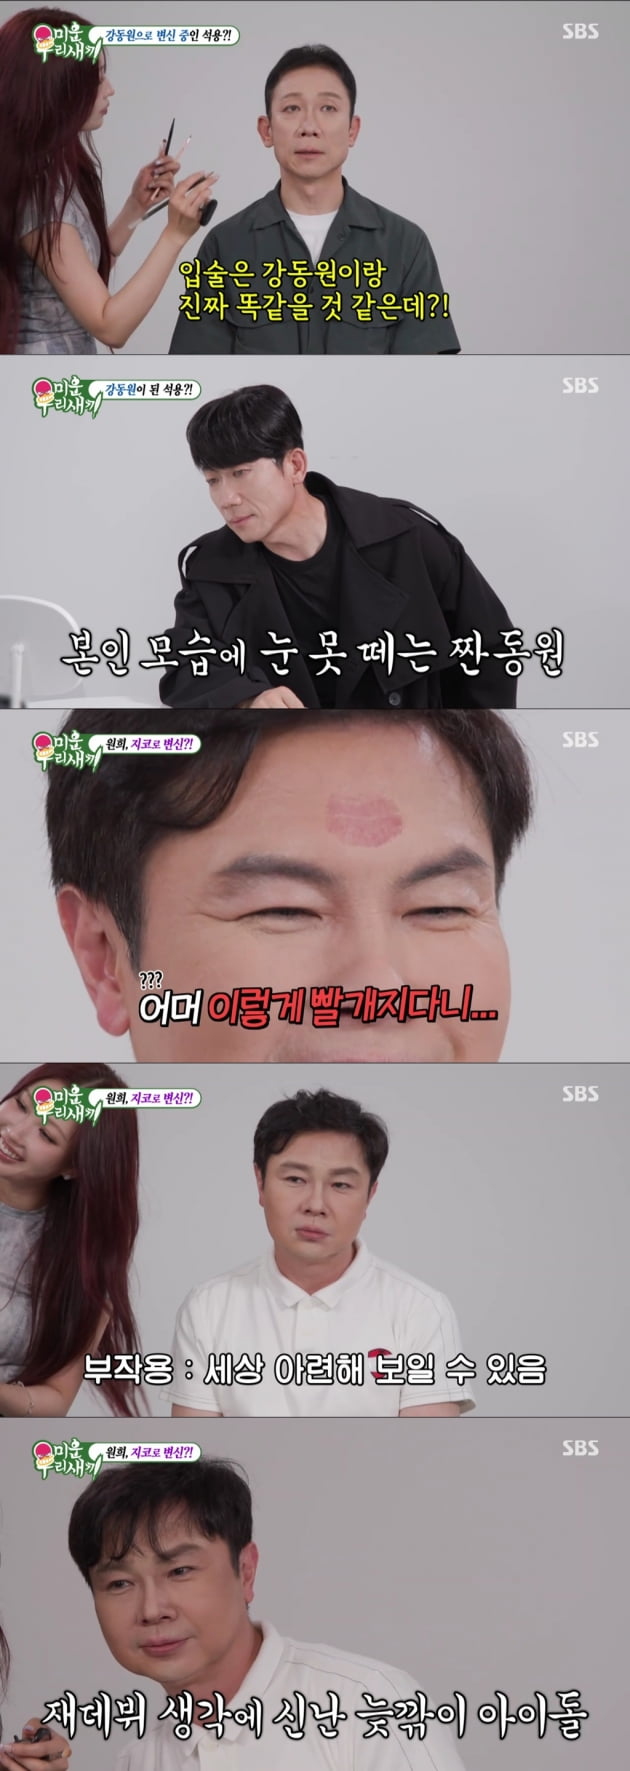 '54 years old' Jeong Suk-yong transforms into Kang Dong-won "I wonder why good-looking actors often look in the mirror"